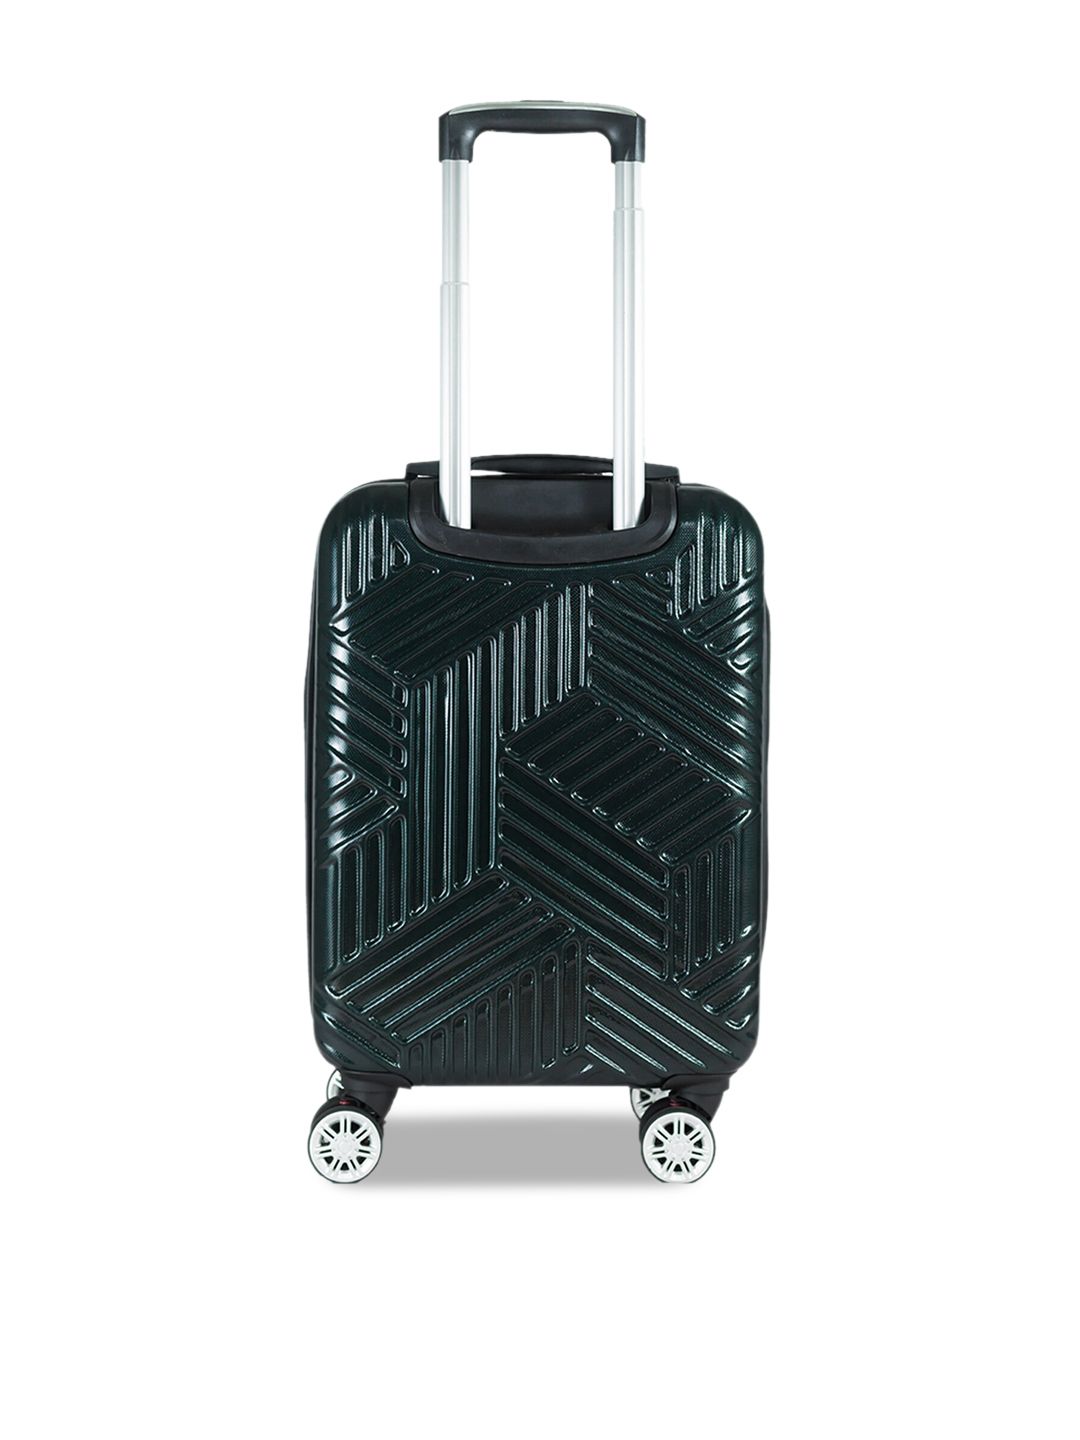 CARRIALL Dark-Green Textured Hard-Sided Cabin Trolley Suitcase Price in India